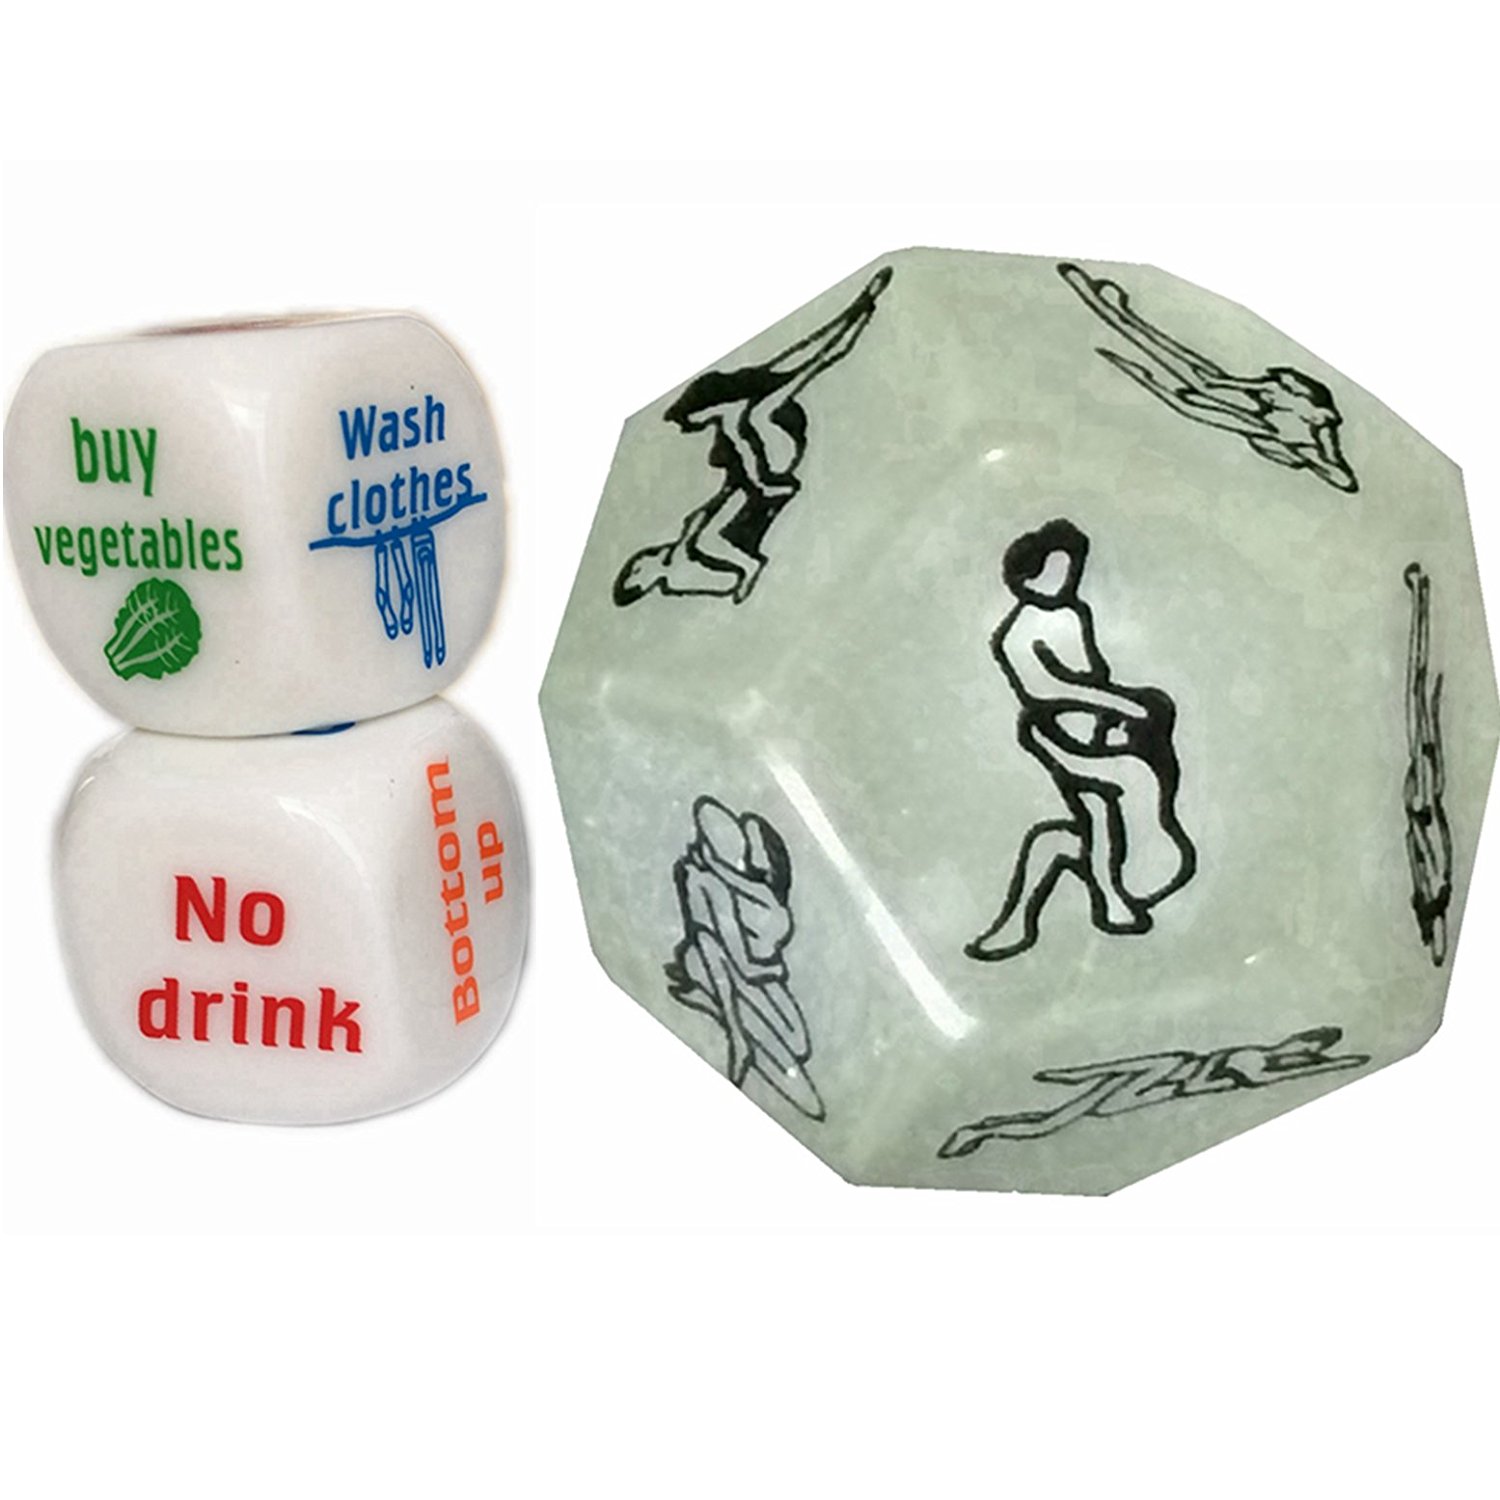 Amazon.com: U-Shark® Glow 12 Sides Position Dice for Bachelor Party ...